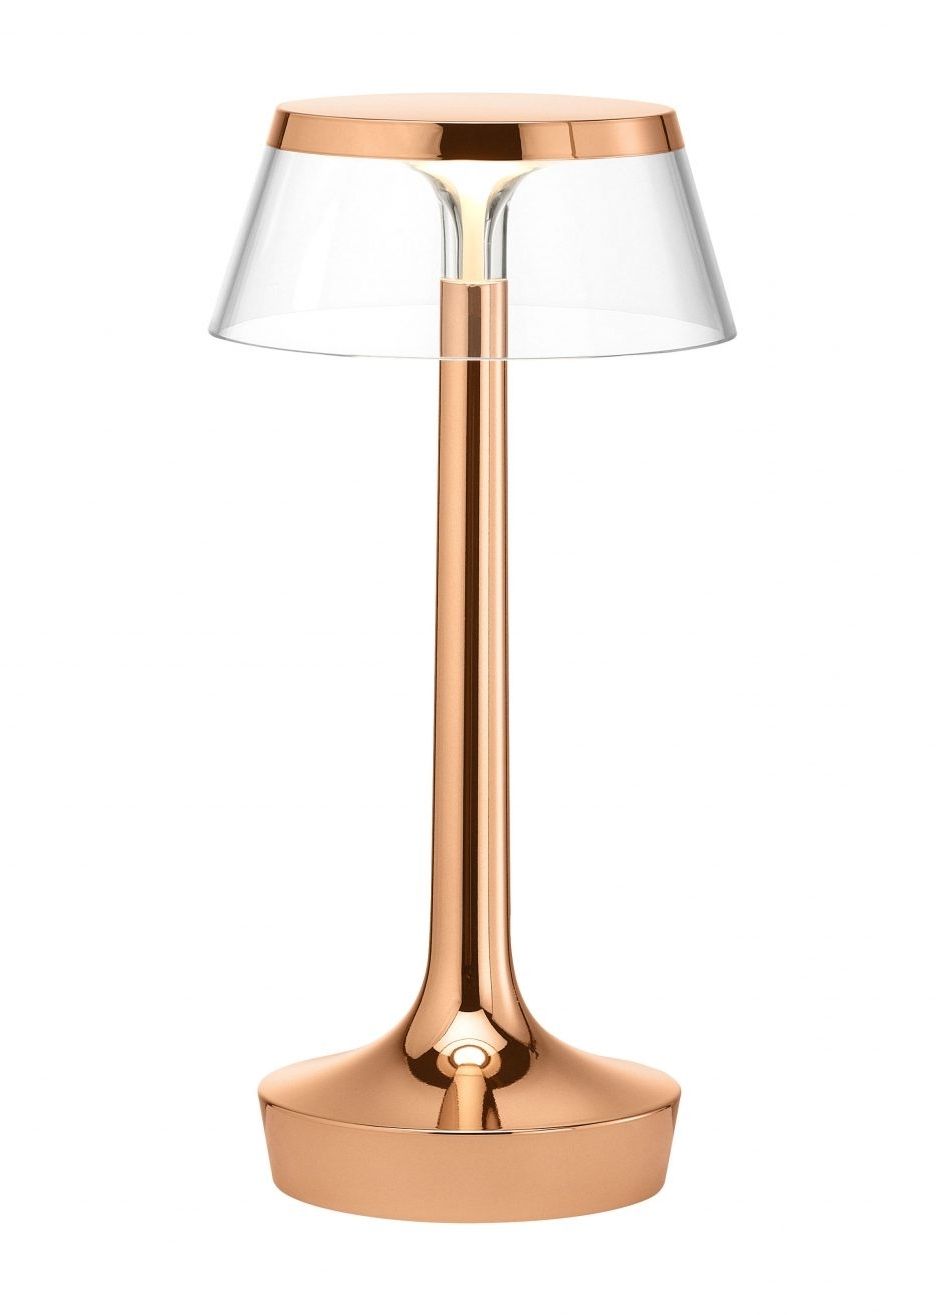 Most Recently Released Battery Operated Living Room Table Lamps Regarding Lamp : Battery Operated Table Lamps Modern Style Tall Glass Target (View 14 of 15)